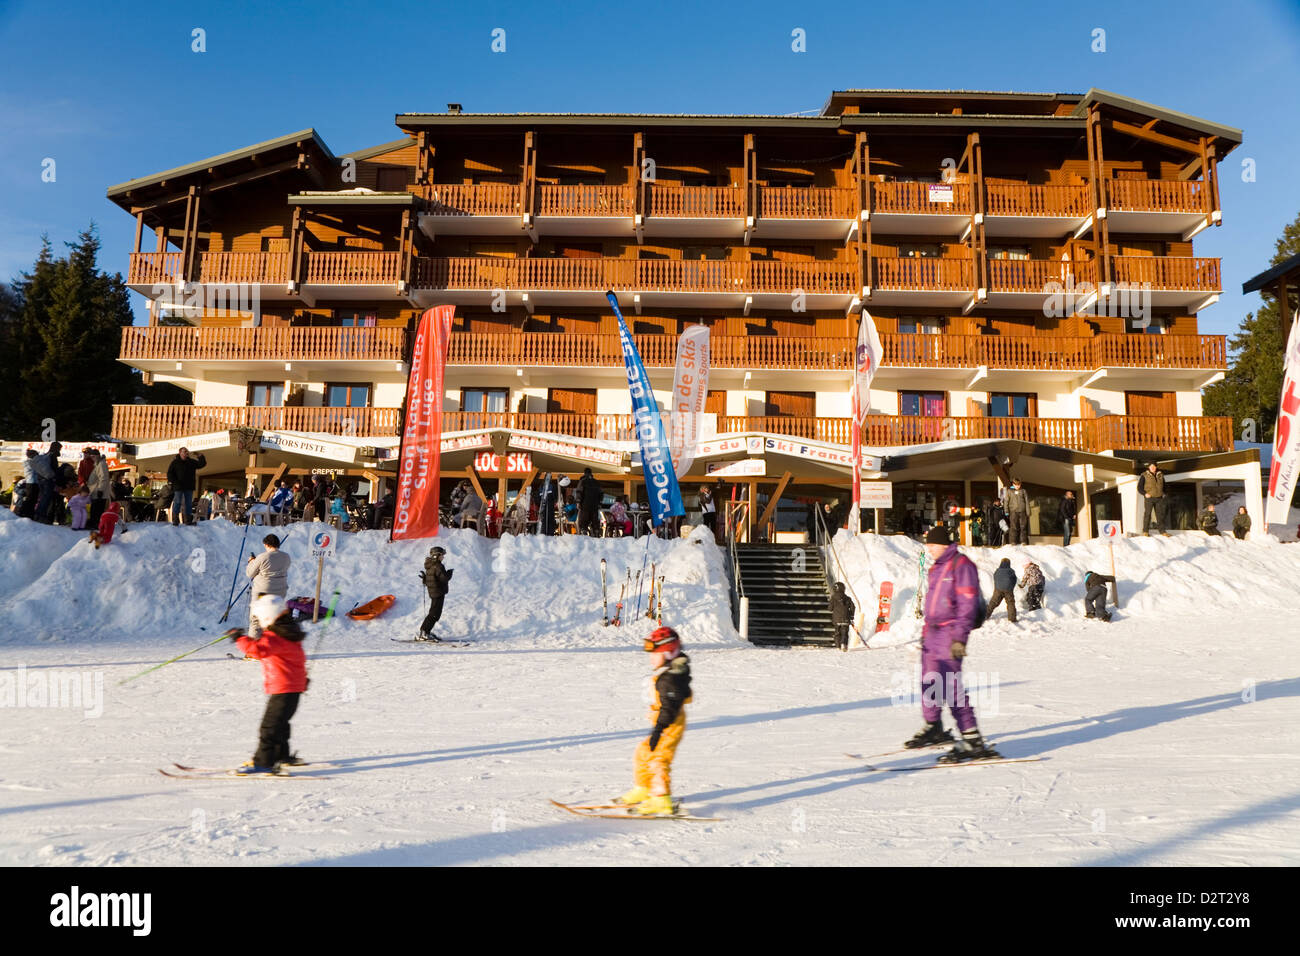 Hotel / ski lodge / skiers' chalet accommodation self catering rental flat  apartment apartments near the slope. Le Revard France Stock Photo - Alamy